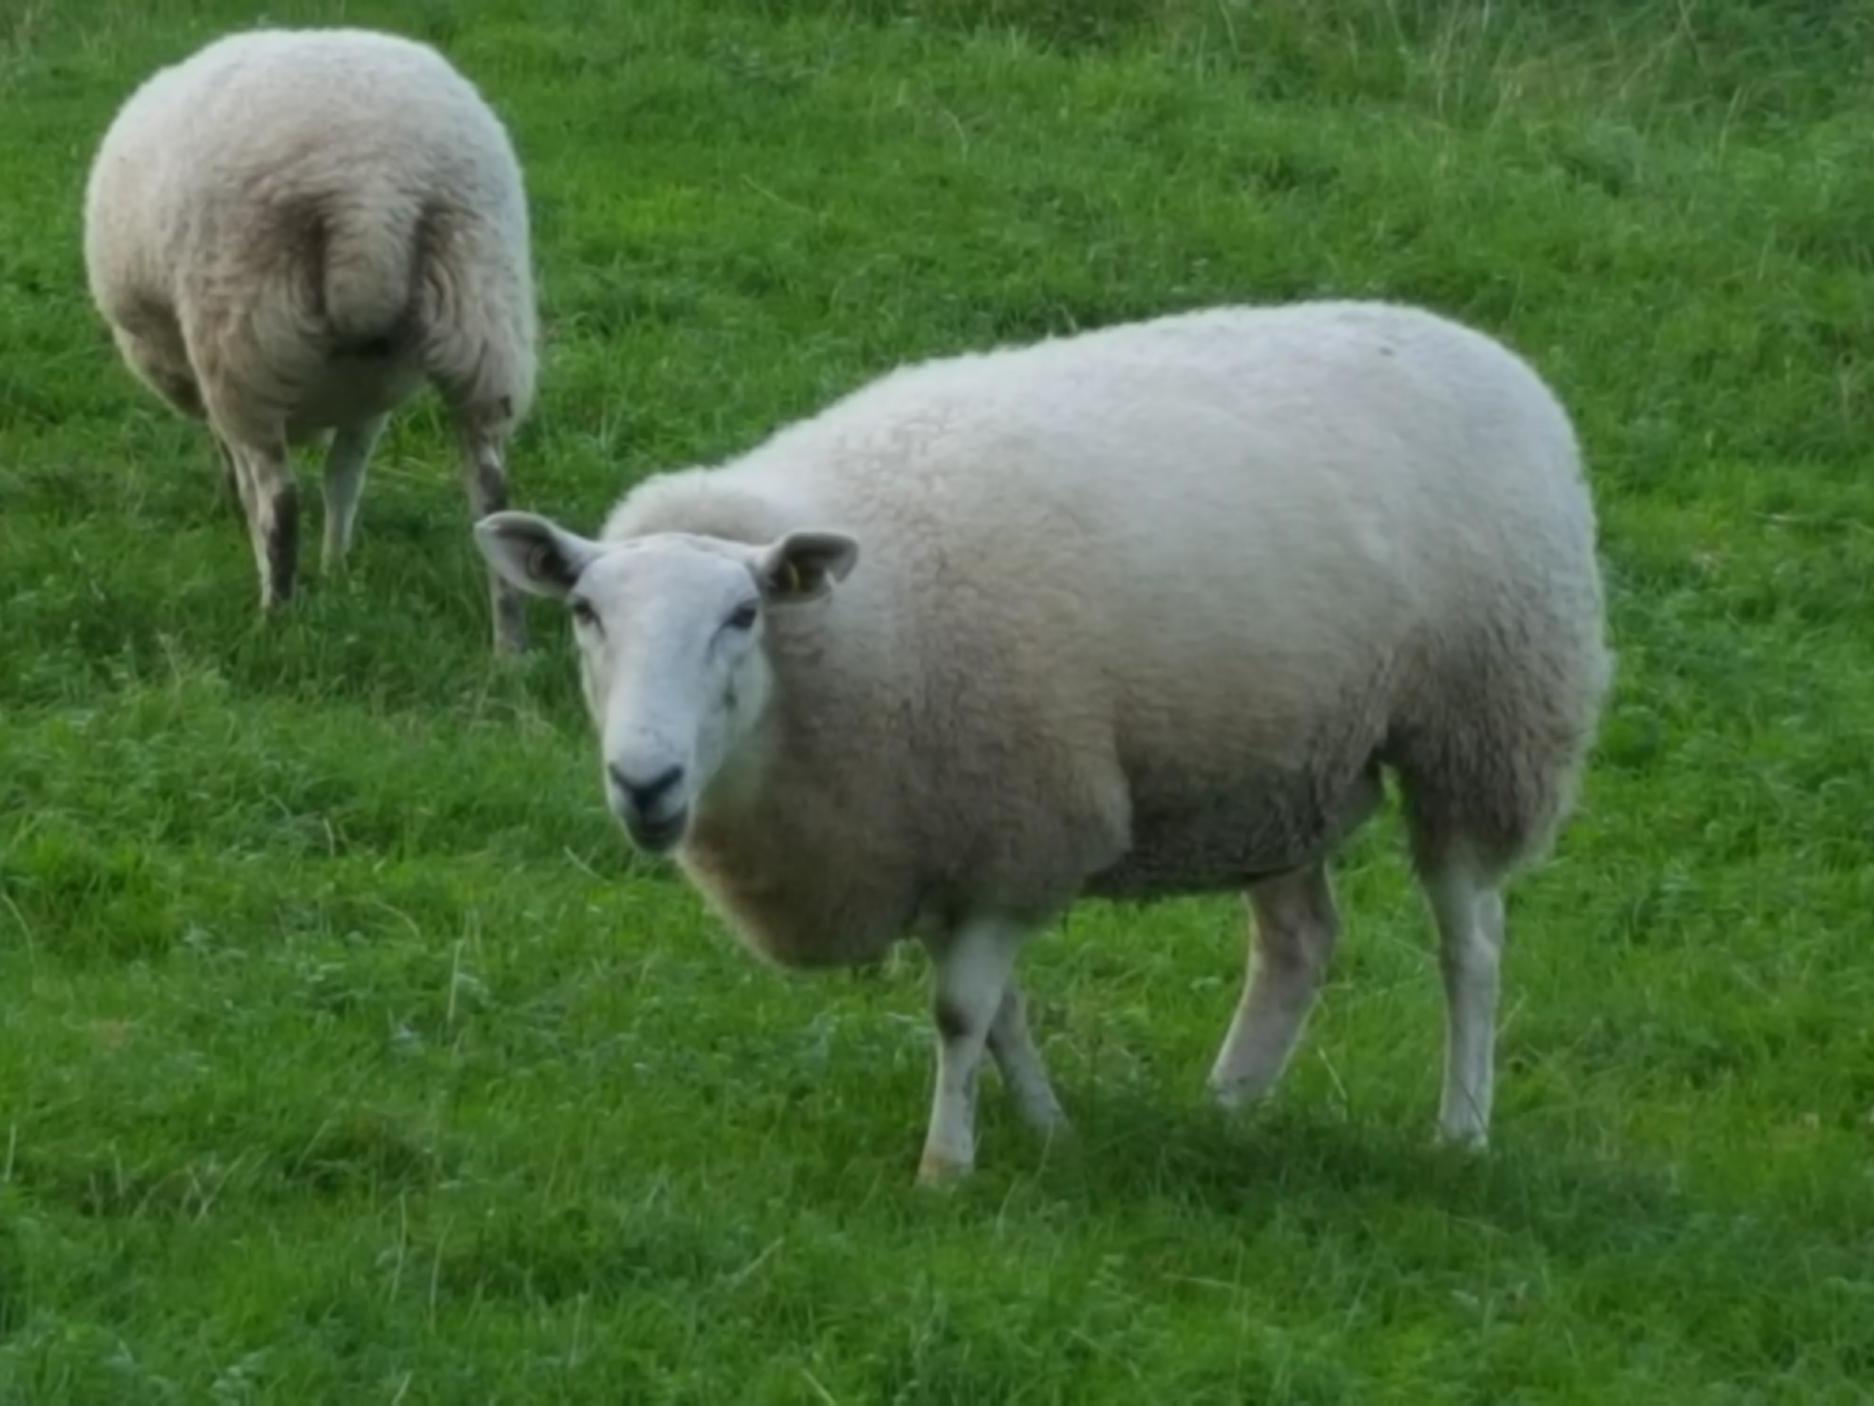 Sheep worth a total of £3m were stolen from farms last year, and the number shot up during the height of the pandemic